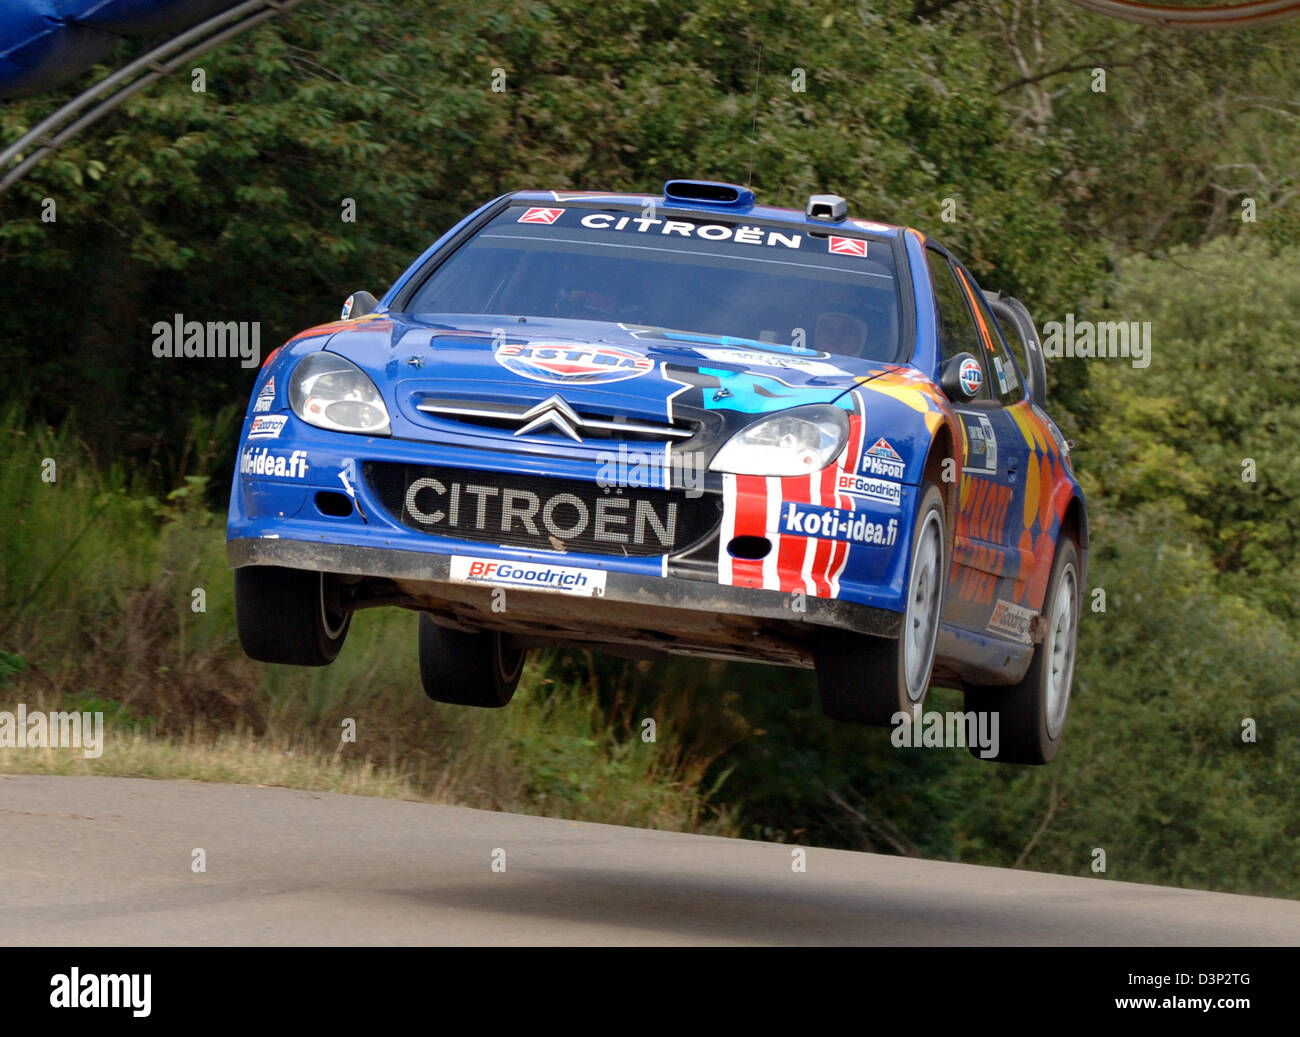 WRC title holder French Sebastien Loeb and Daniel Elena (Monaco) jump in their Citroen Xsara over the knoll 'Gina' at the 'Panzerplatte' stage of the OMV ADAC Rallye Germany in Baumholder, Germany, Saturday, 12 August 2006. The World Rallye Championship (WRC) rallye including 19 stages ends on Sunday, 13 August at the Porta Nigra in Trier. Photo: Harald Tittel Stock Photo